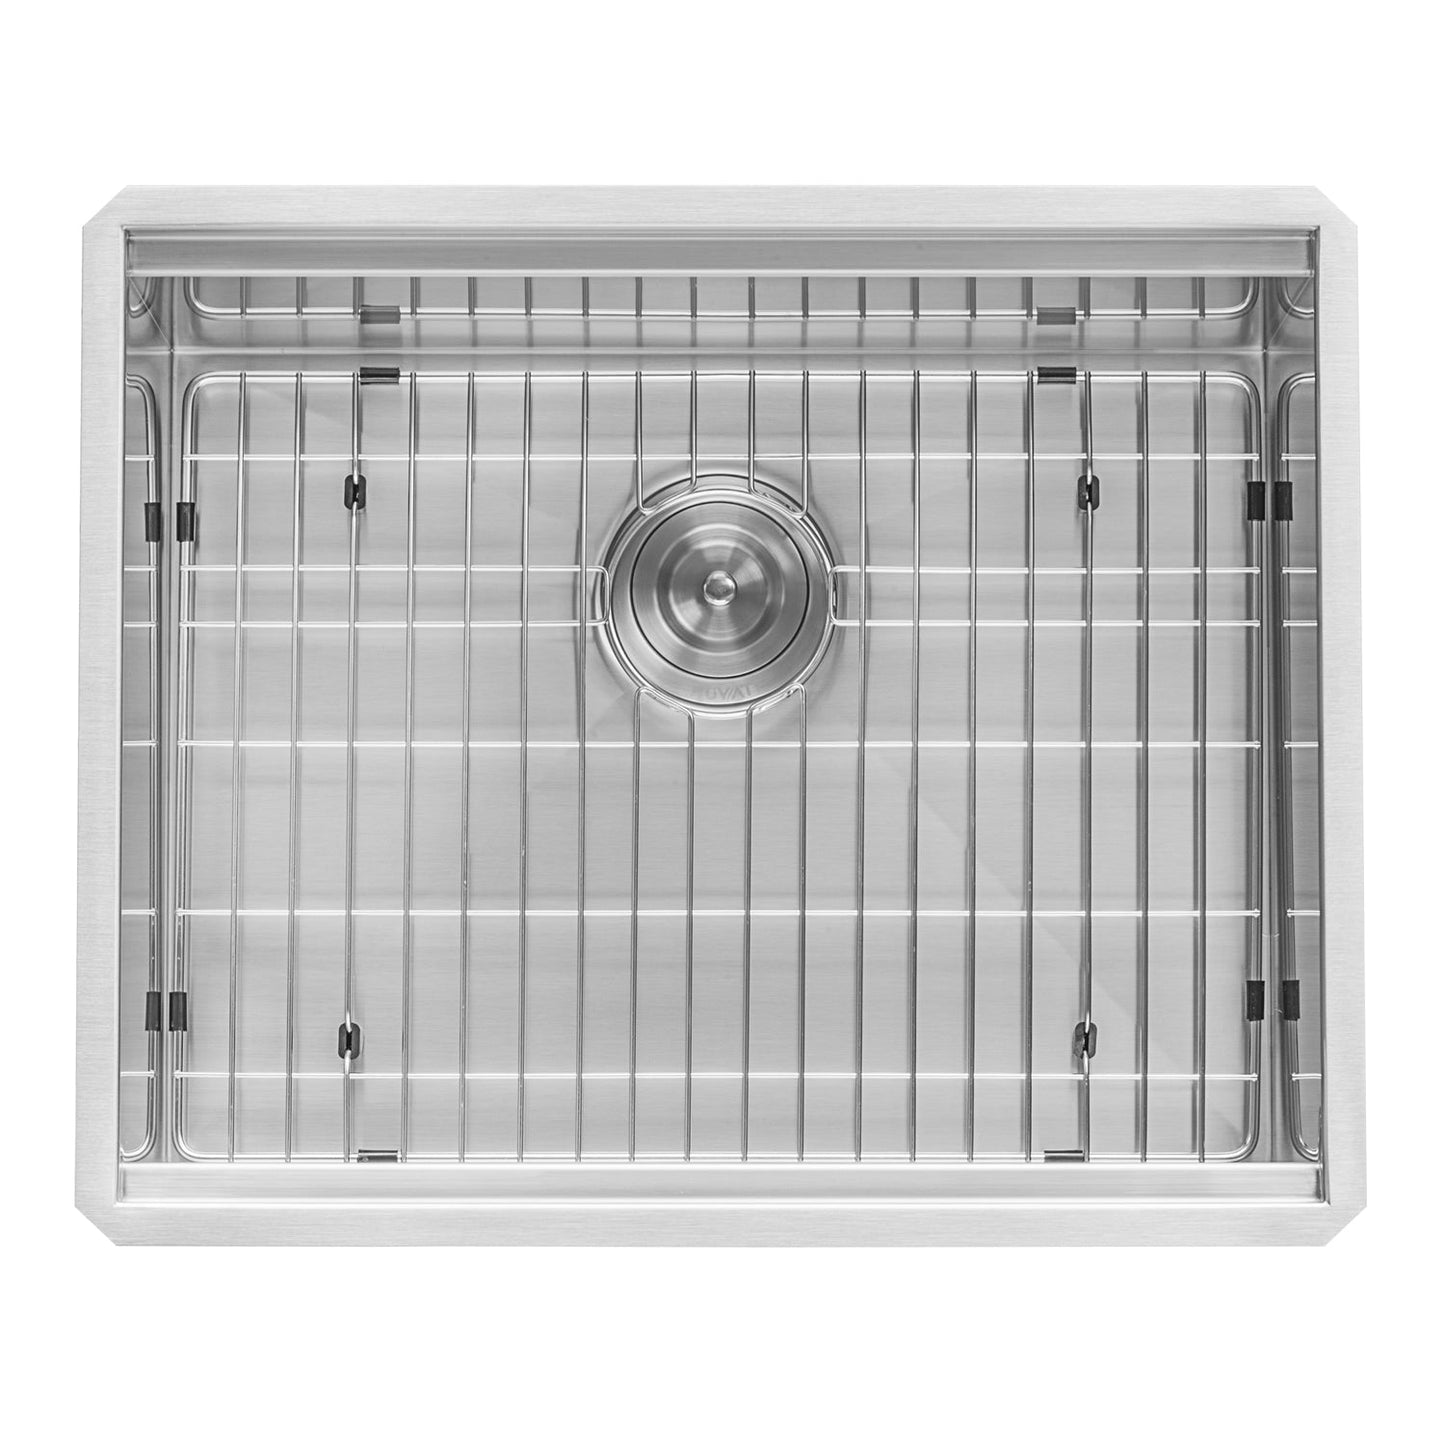 Ruvati Roma 23" x 19" Undermount Stainless Steel Single Bowl Bar Prep Workstation Sink With Bottom Rinse Grid and Drain Assembly